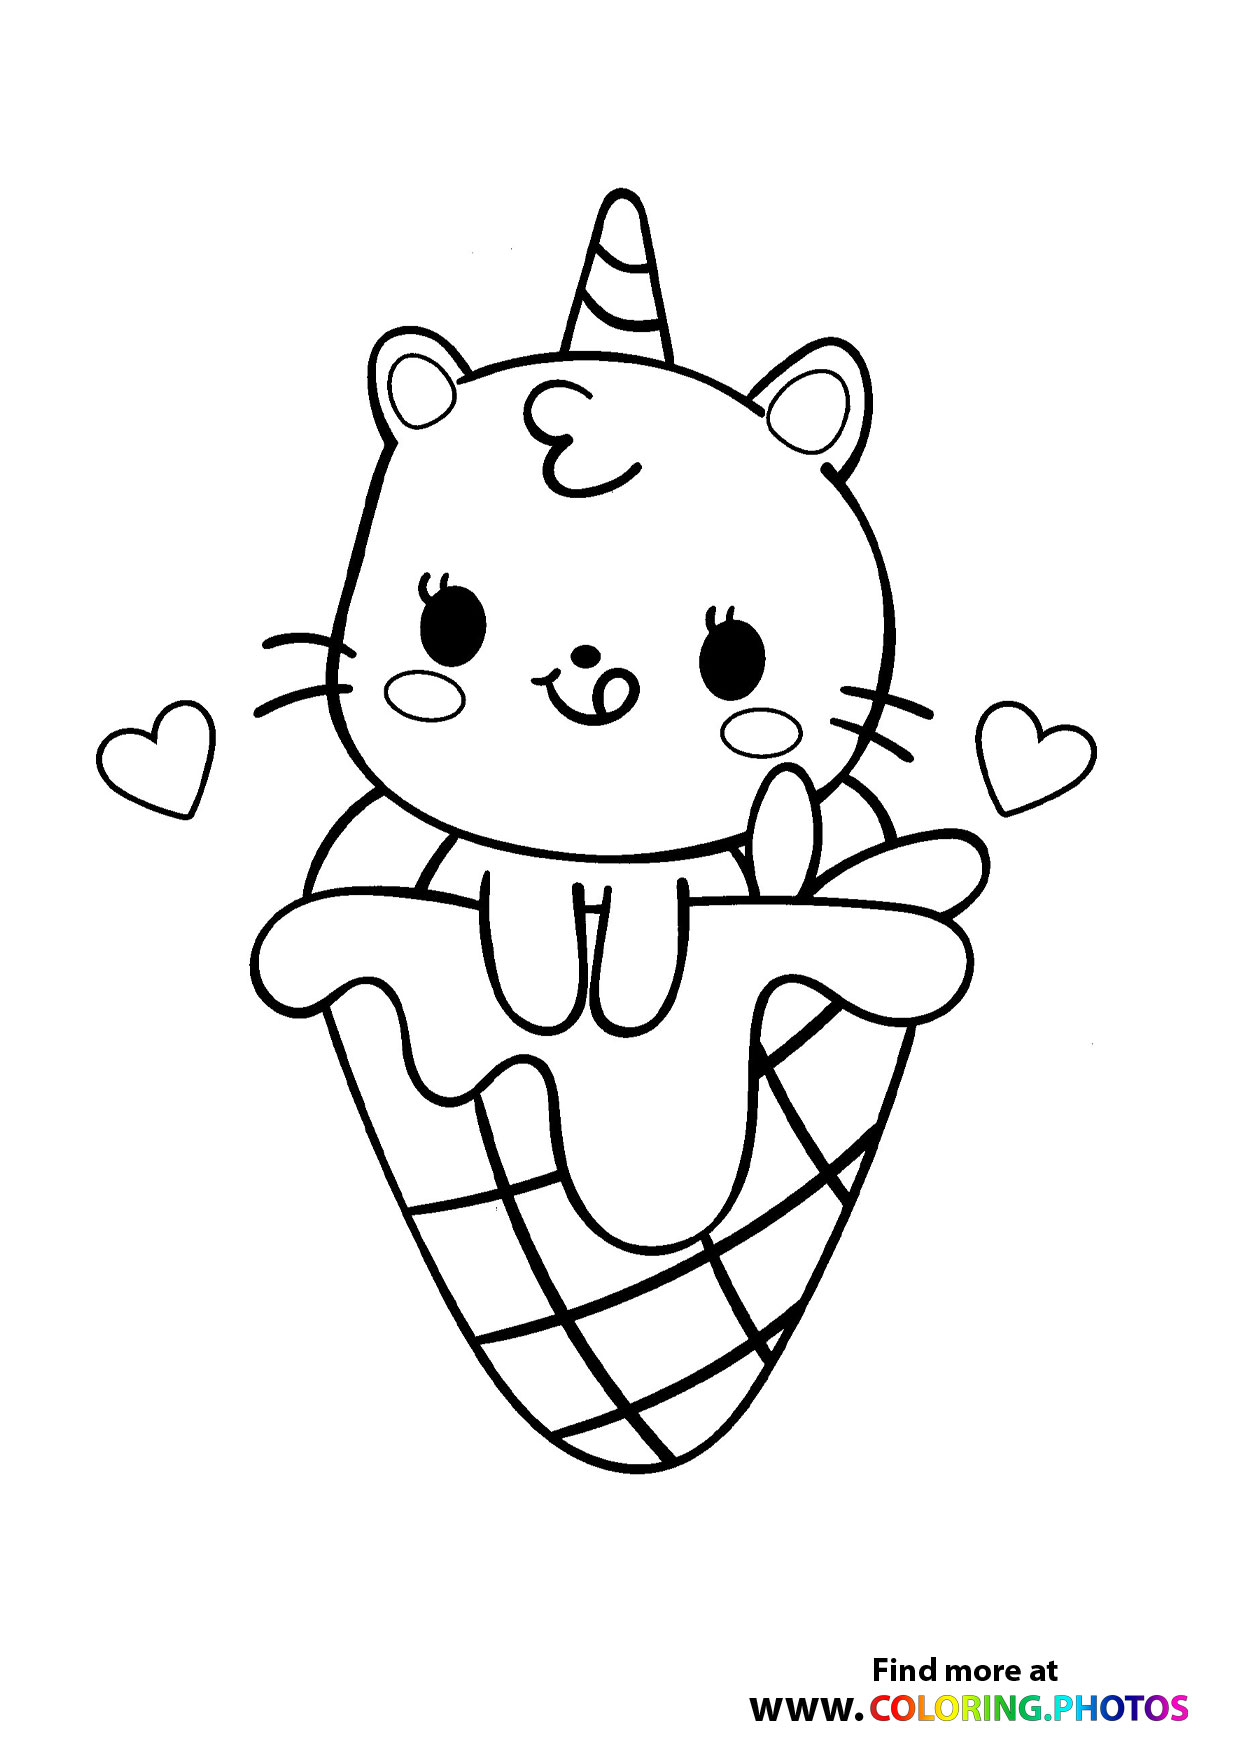 Unicorn cat in a ice-cream - Coloring Pages for kids